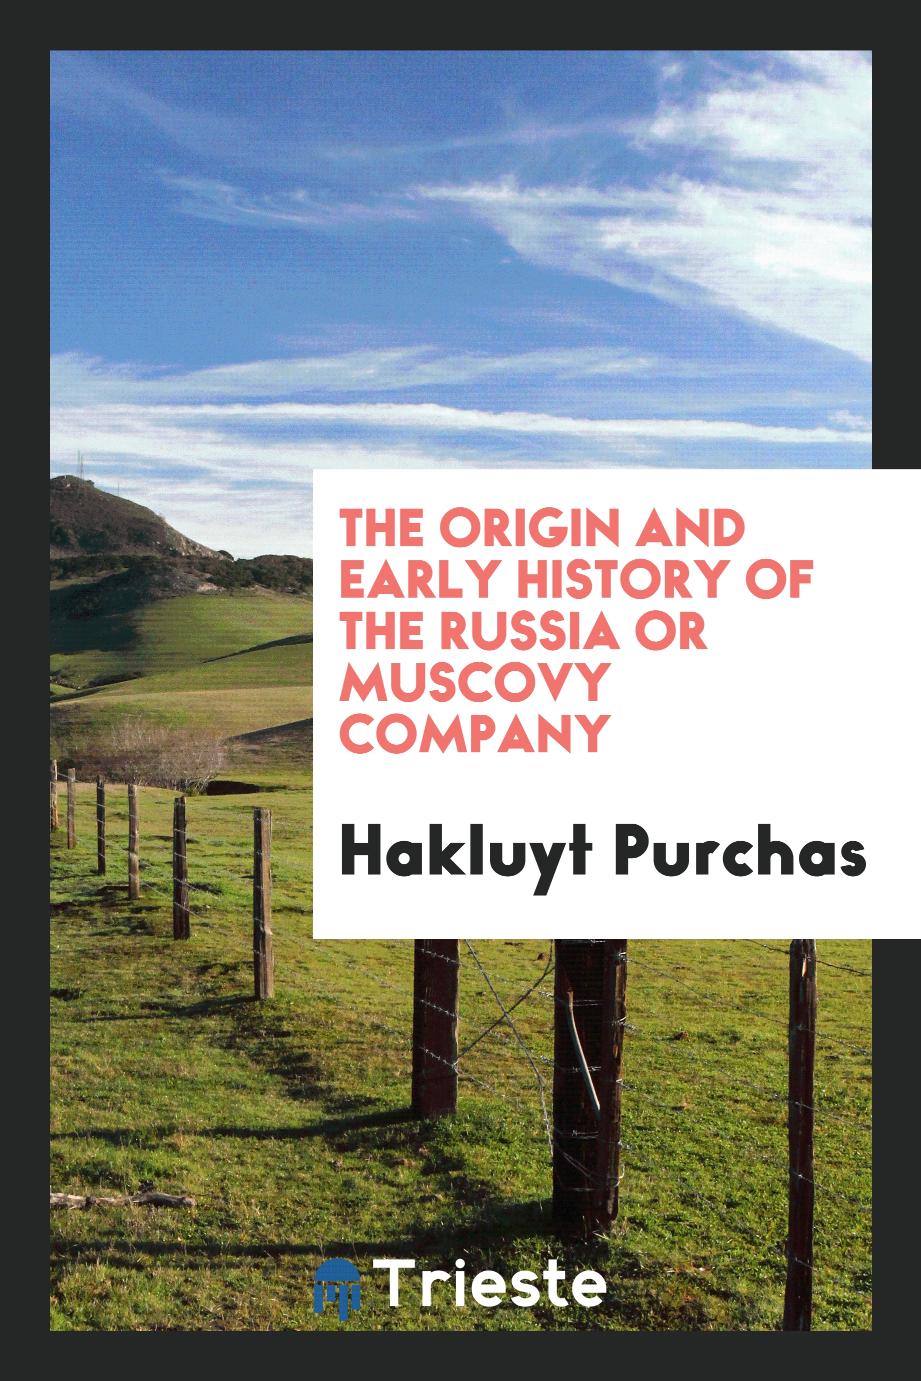 The origin and early history of the Russia or Muscovy company